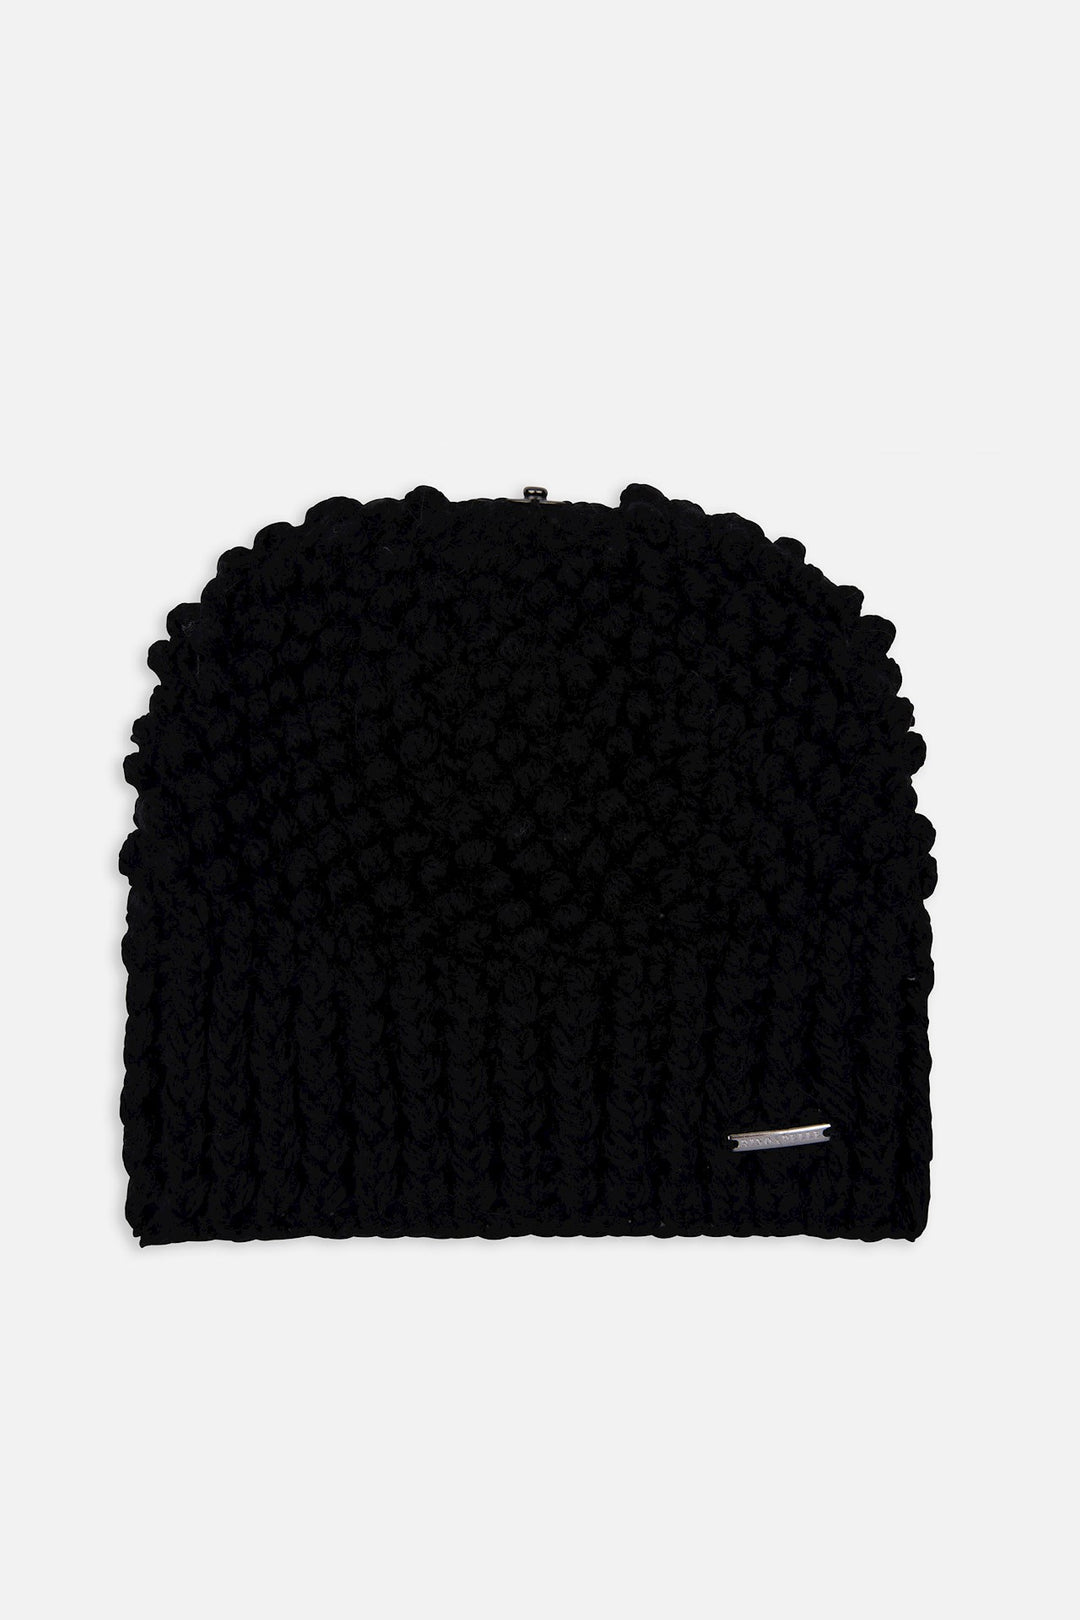 Rino & Pelle Kevina Knitted Beanie with Pom Pom Black | Dotique